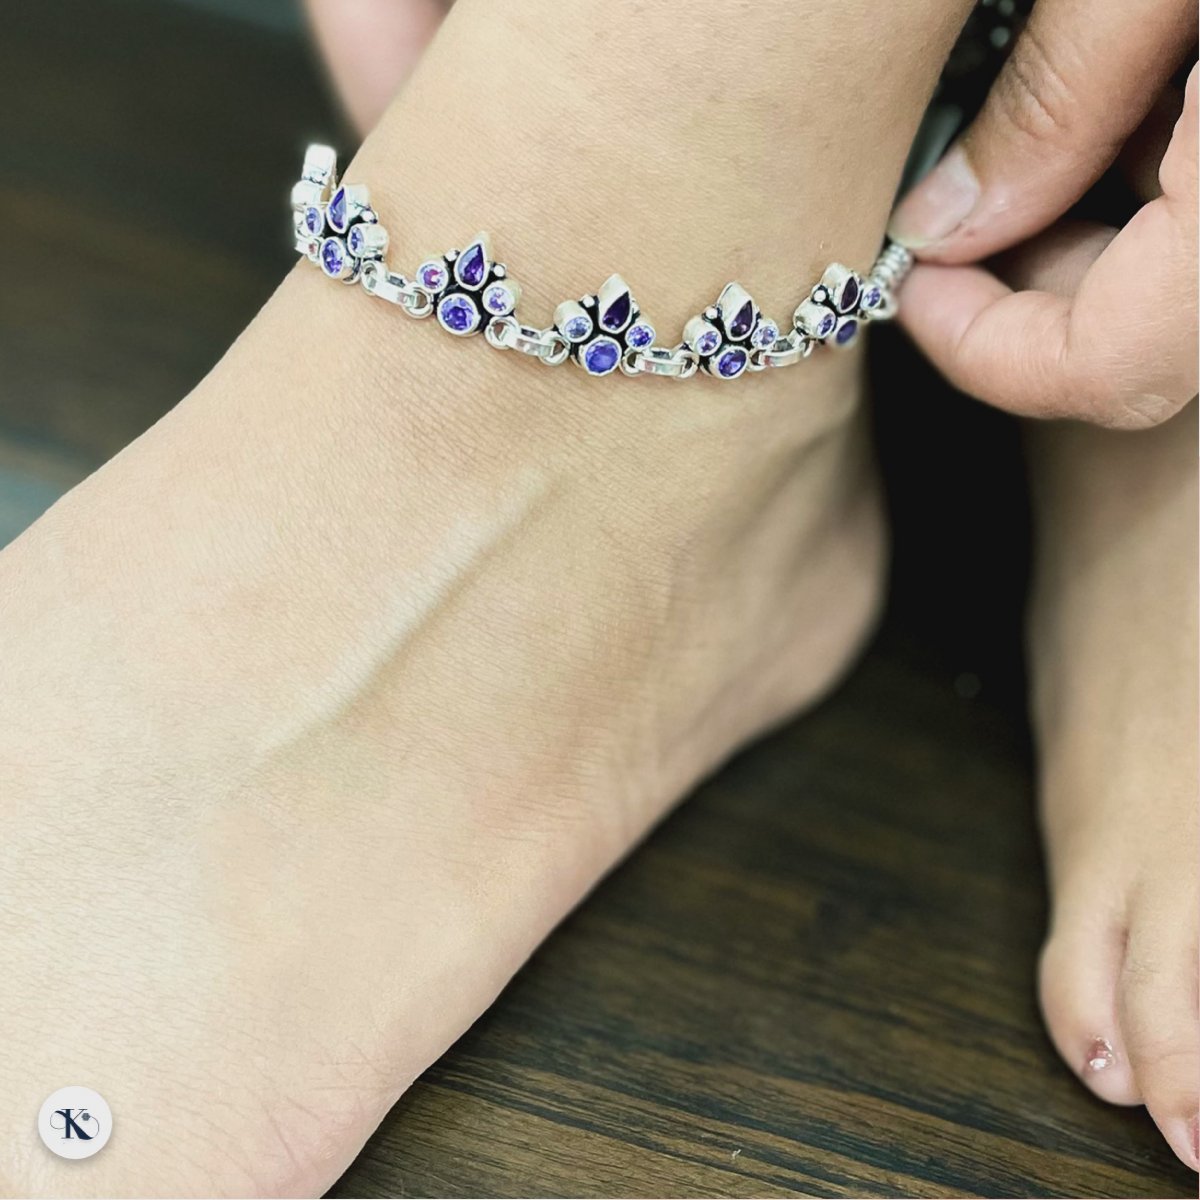 PURE SIMPLE AMETHYST STONE ANKLET FOR THE AUSPICIOUS EVENING 